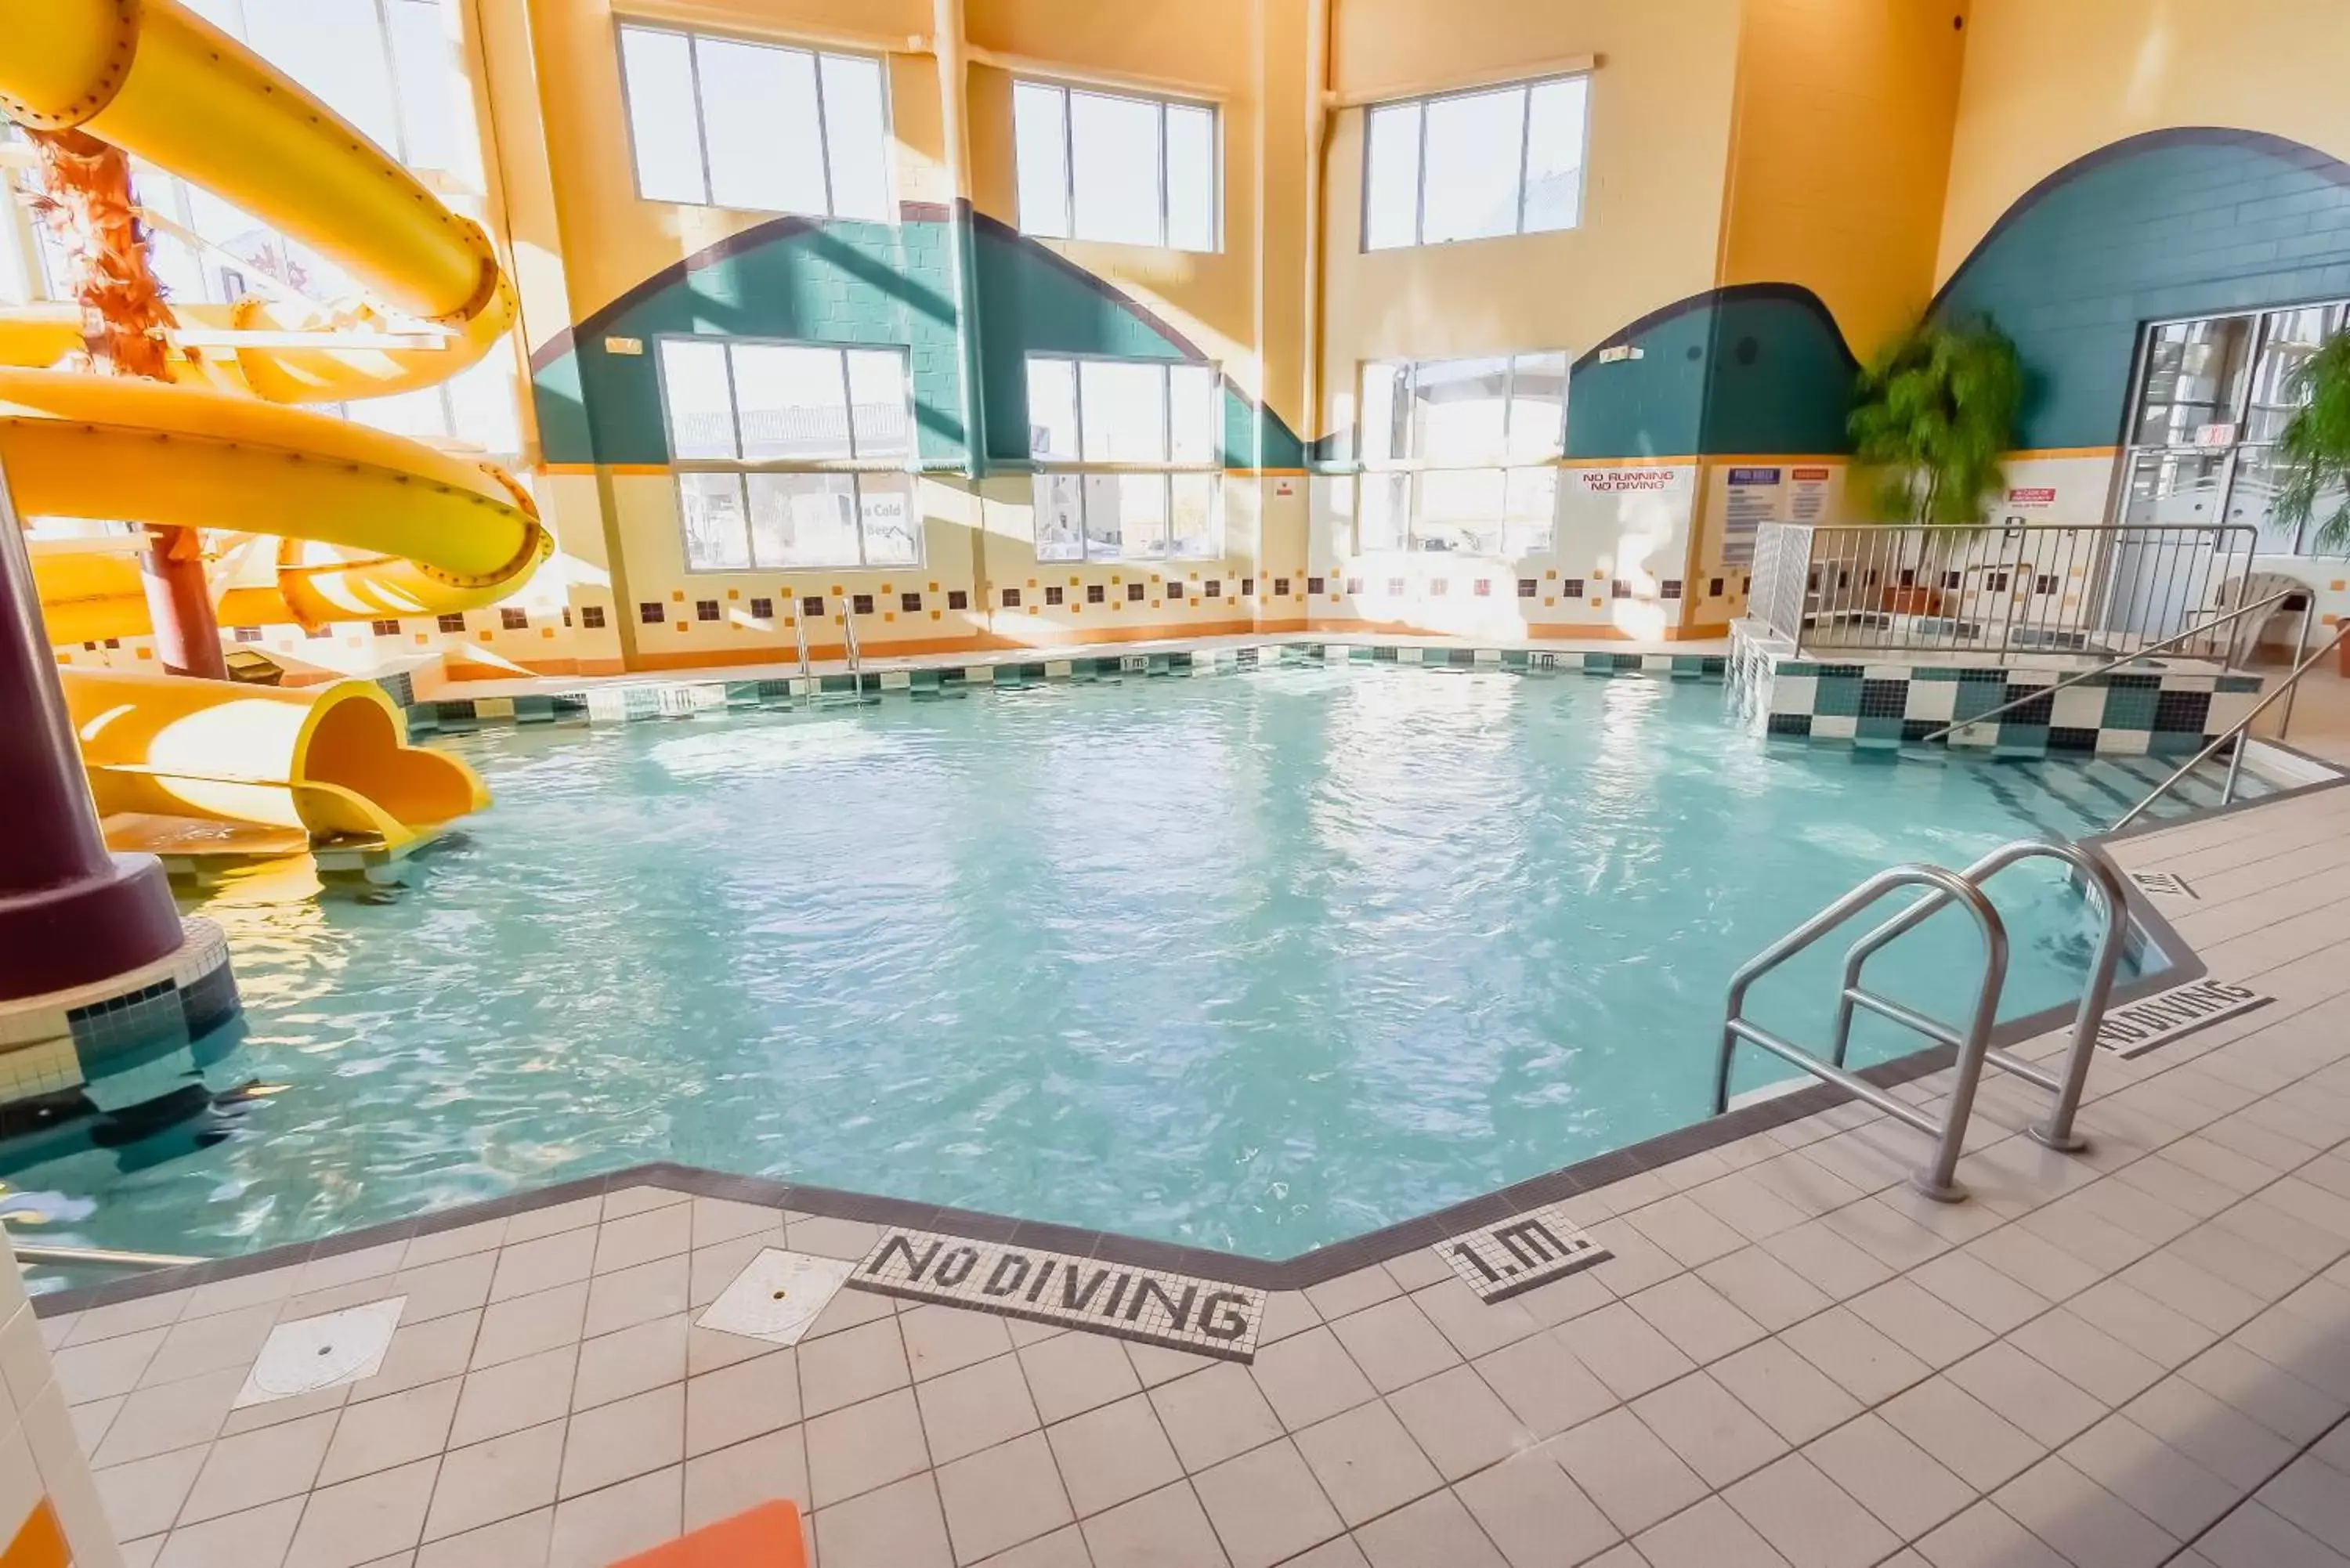 Swimming Pool in Canad Inns Destination Centre Polo Park